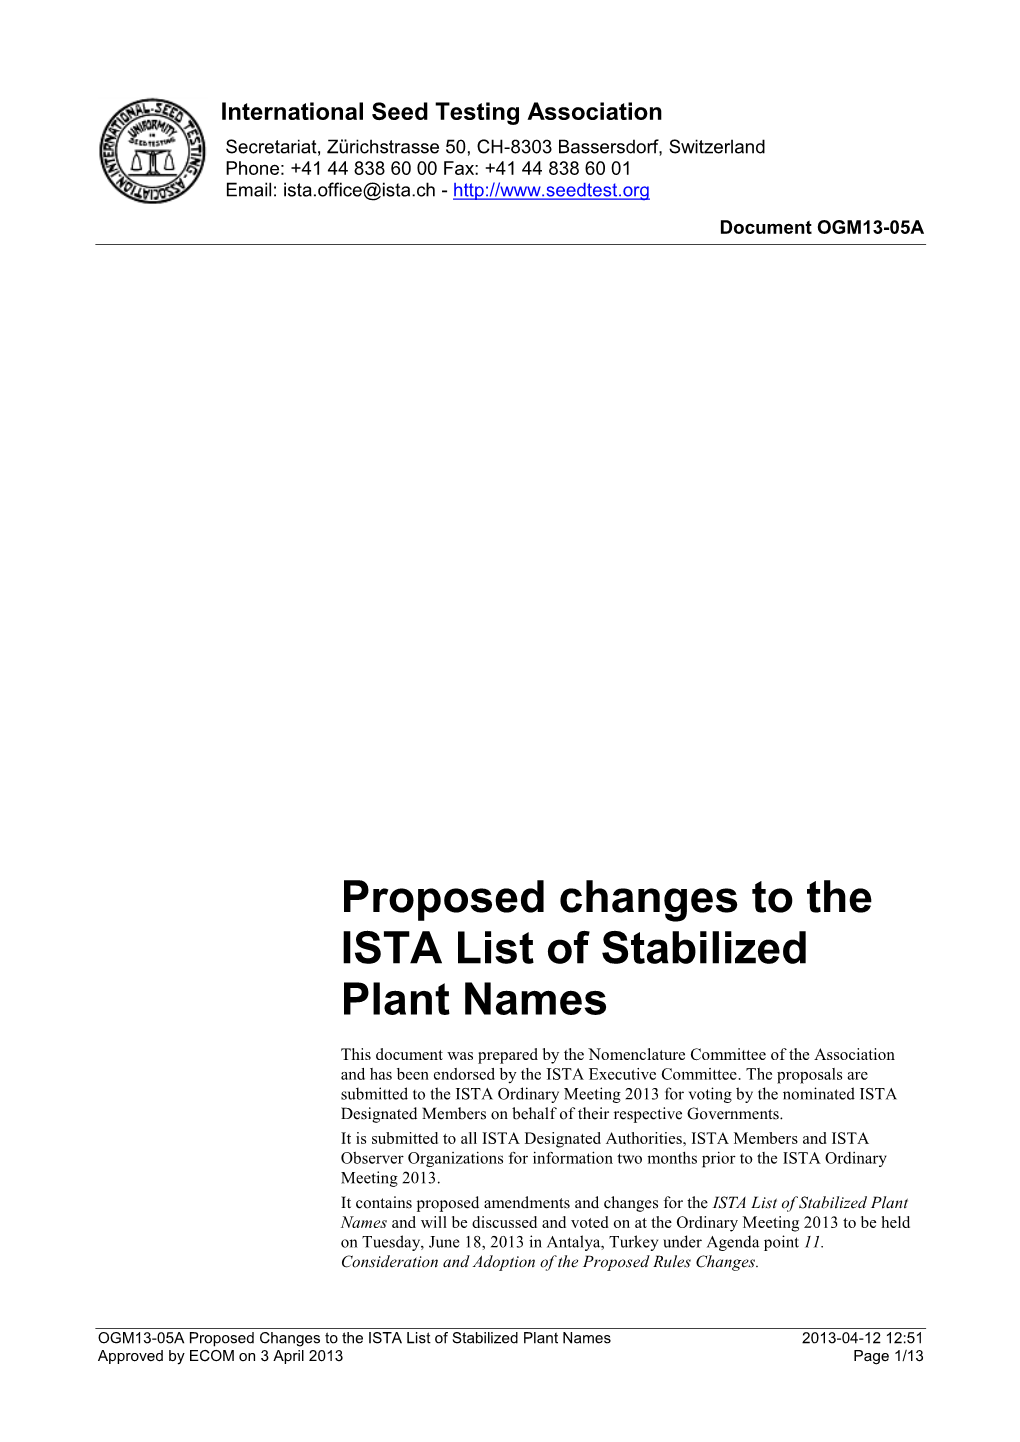 Proposed Changes to the ISTA List of Stabilized Plant Names